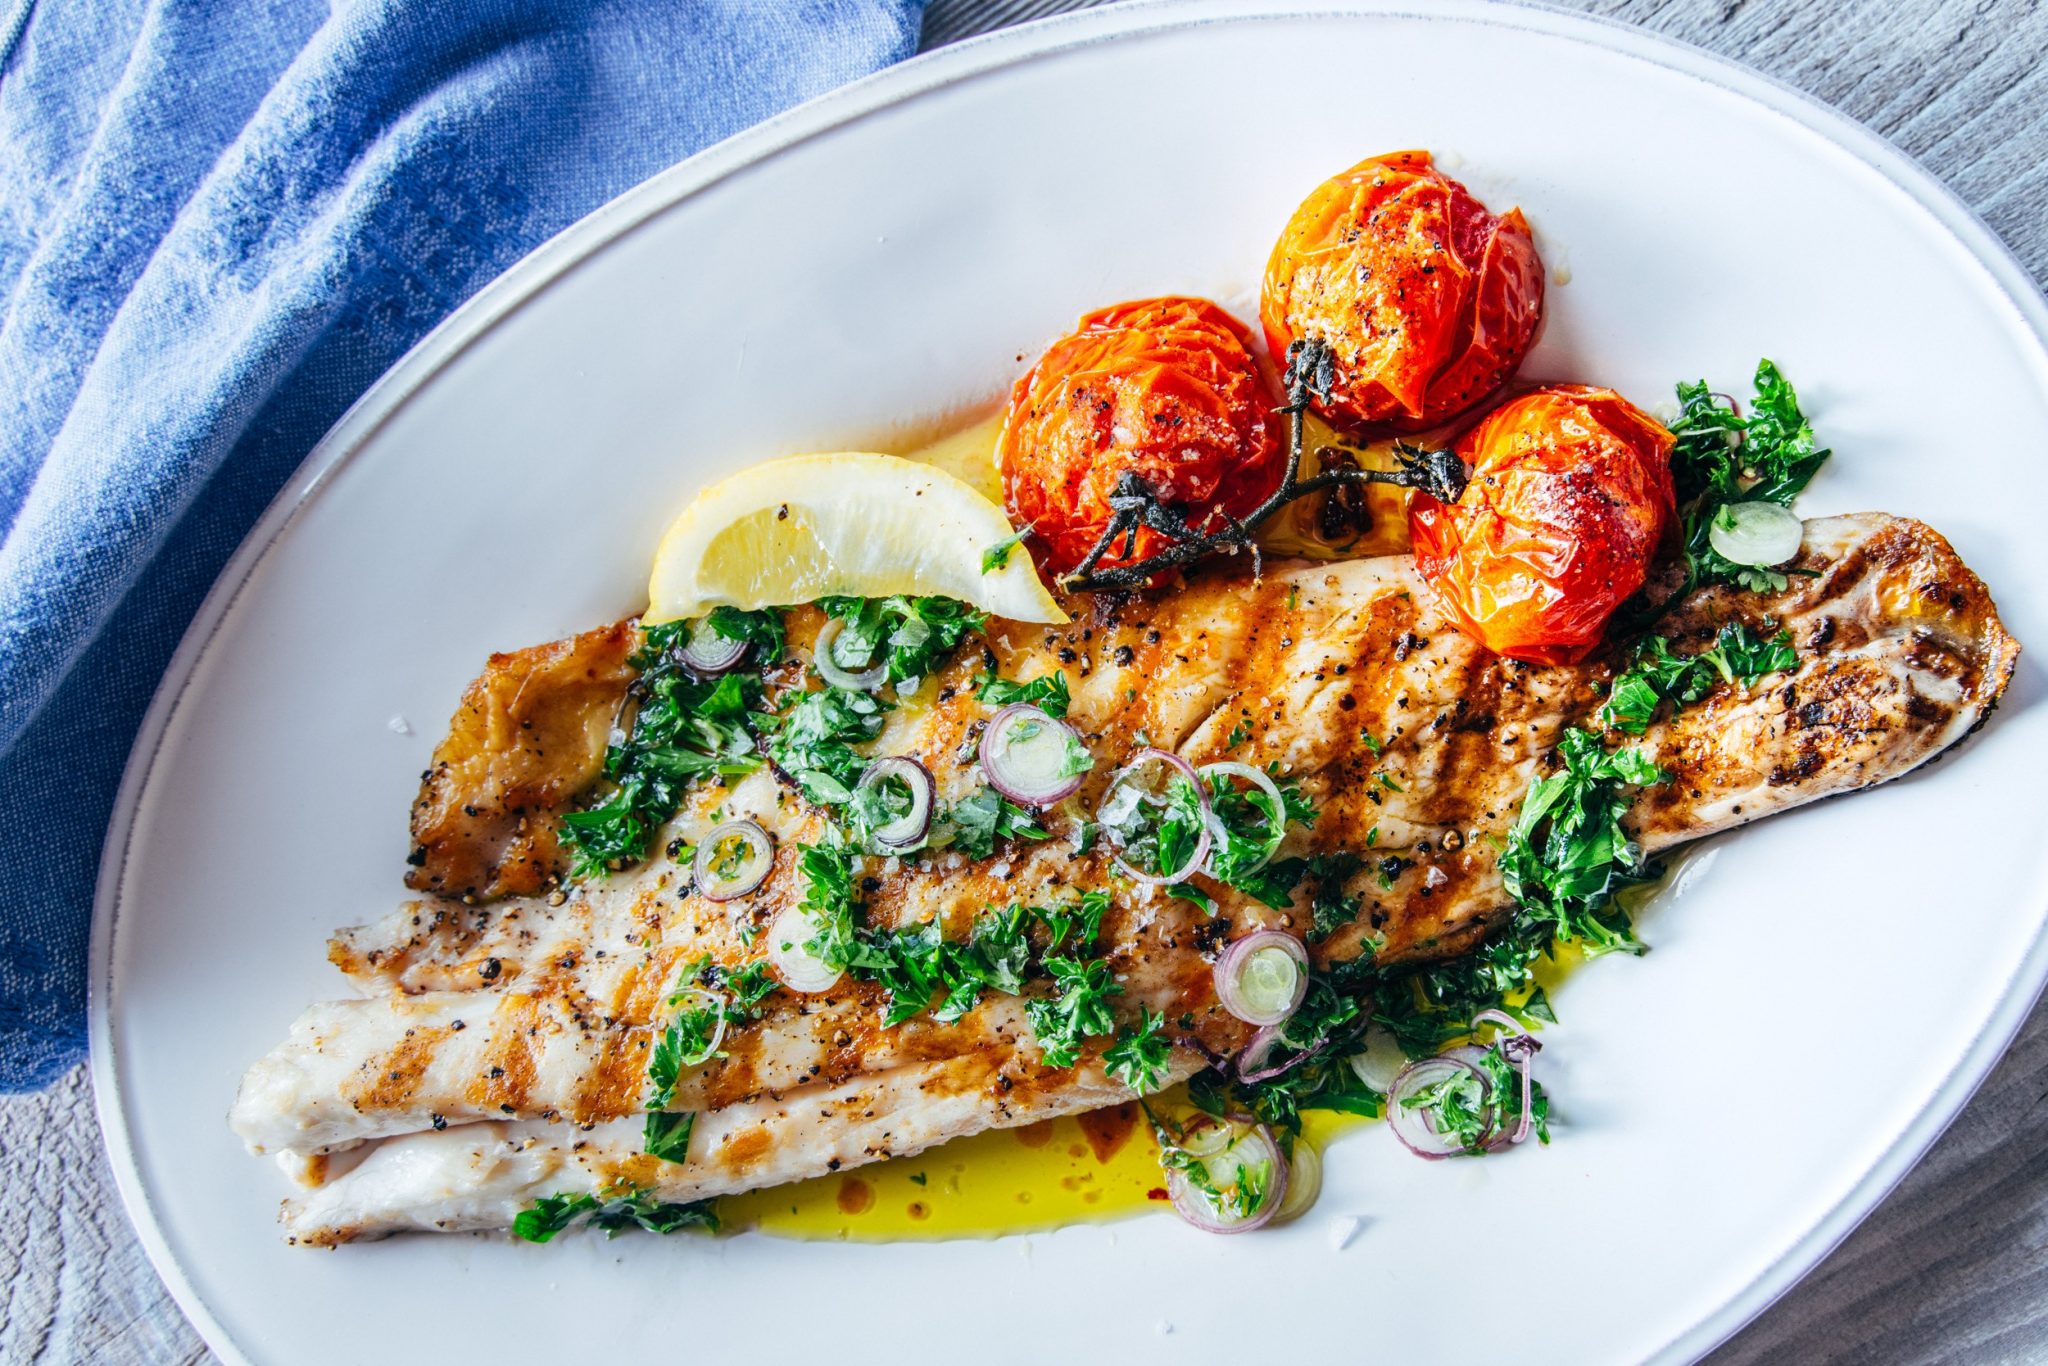 Roasted Pacifico Striped Bass with Baja Chimichurri and Blistered Tomatoes  - Santa Monica Seafood Market & Restaurant